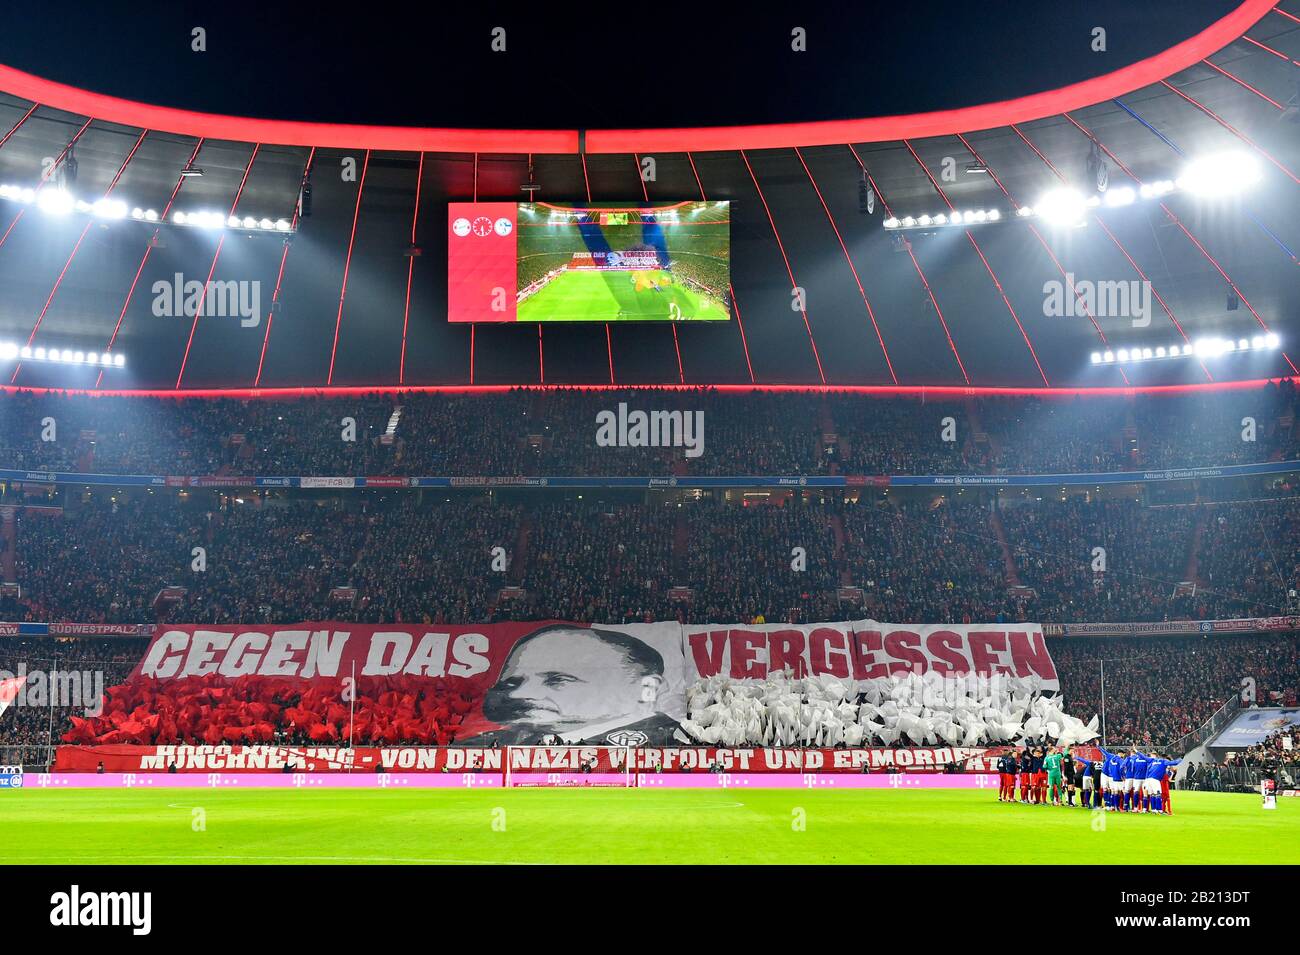 Fan choreography against forgetting in memory of the liberation of the Nazi concentration camp Auschwitz 75 years ago, Allianz Arena, Munich Stock Photo